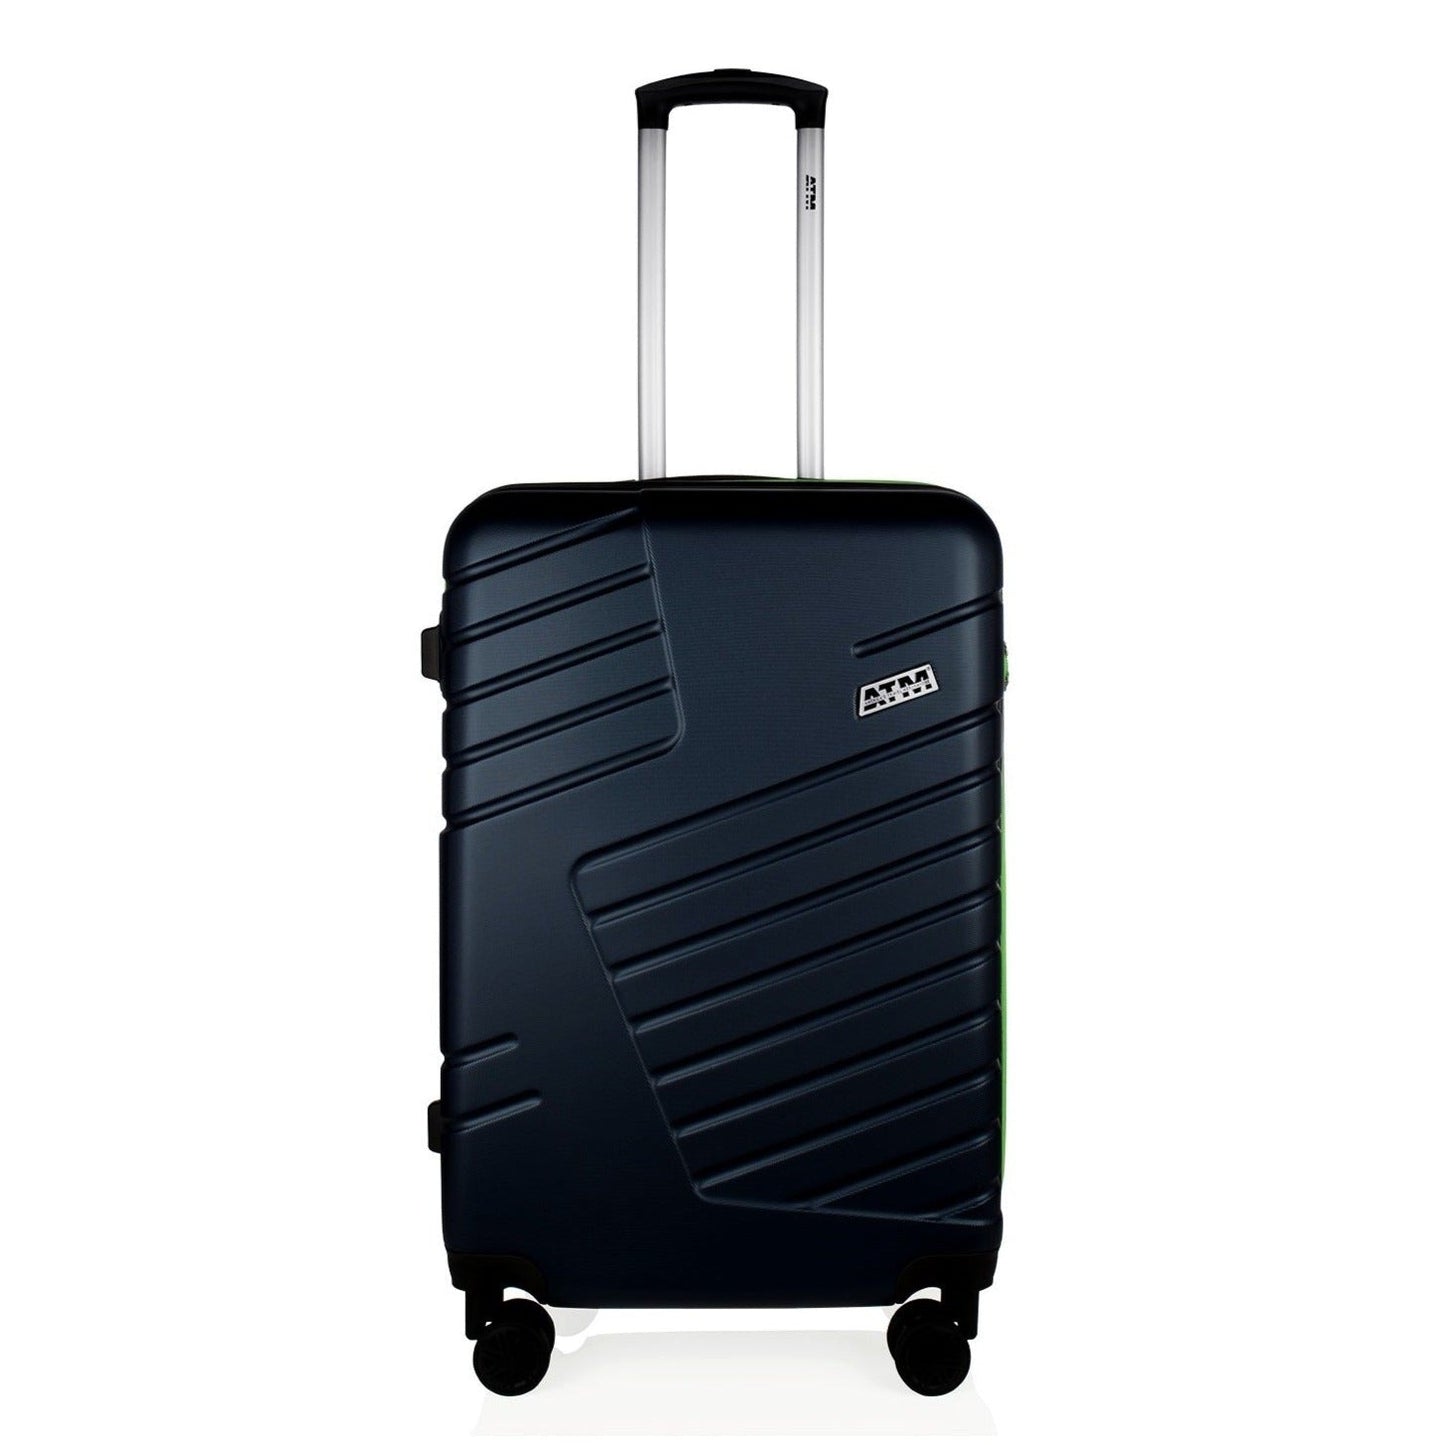 LUCKY Collection Black Luggage (21/25/29") Suitcase Lock Spinner Hardshell